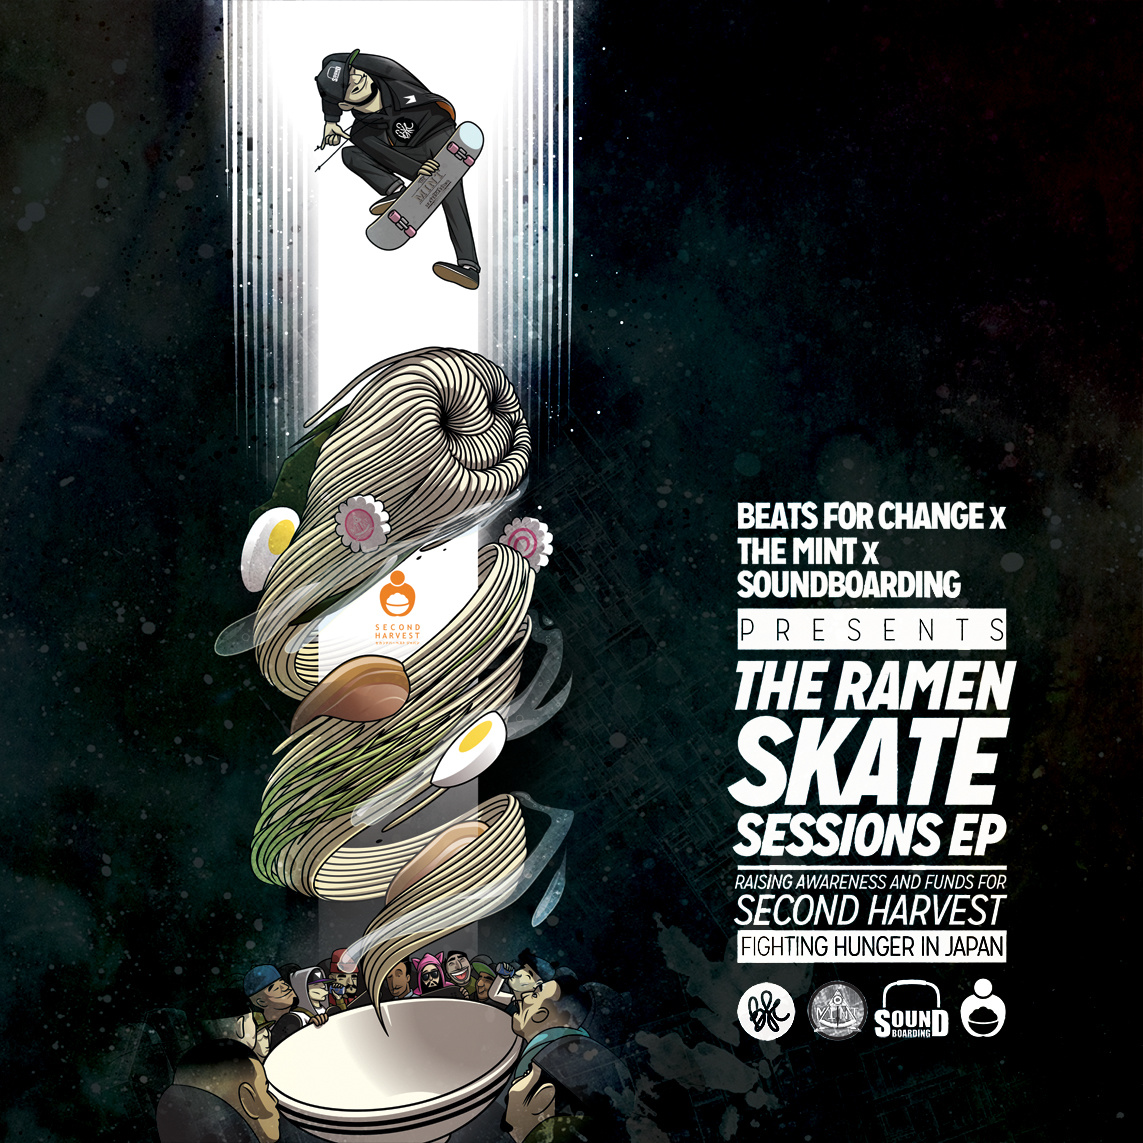 Beats for Change "The Ramen Skate Sessions" Release